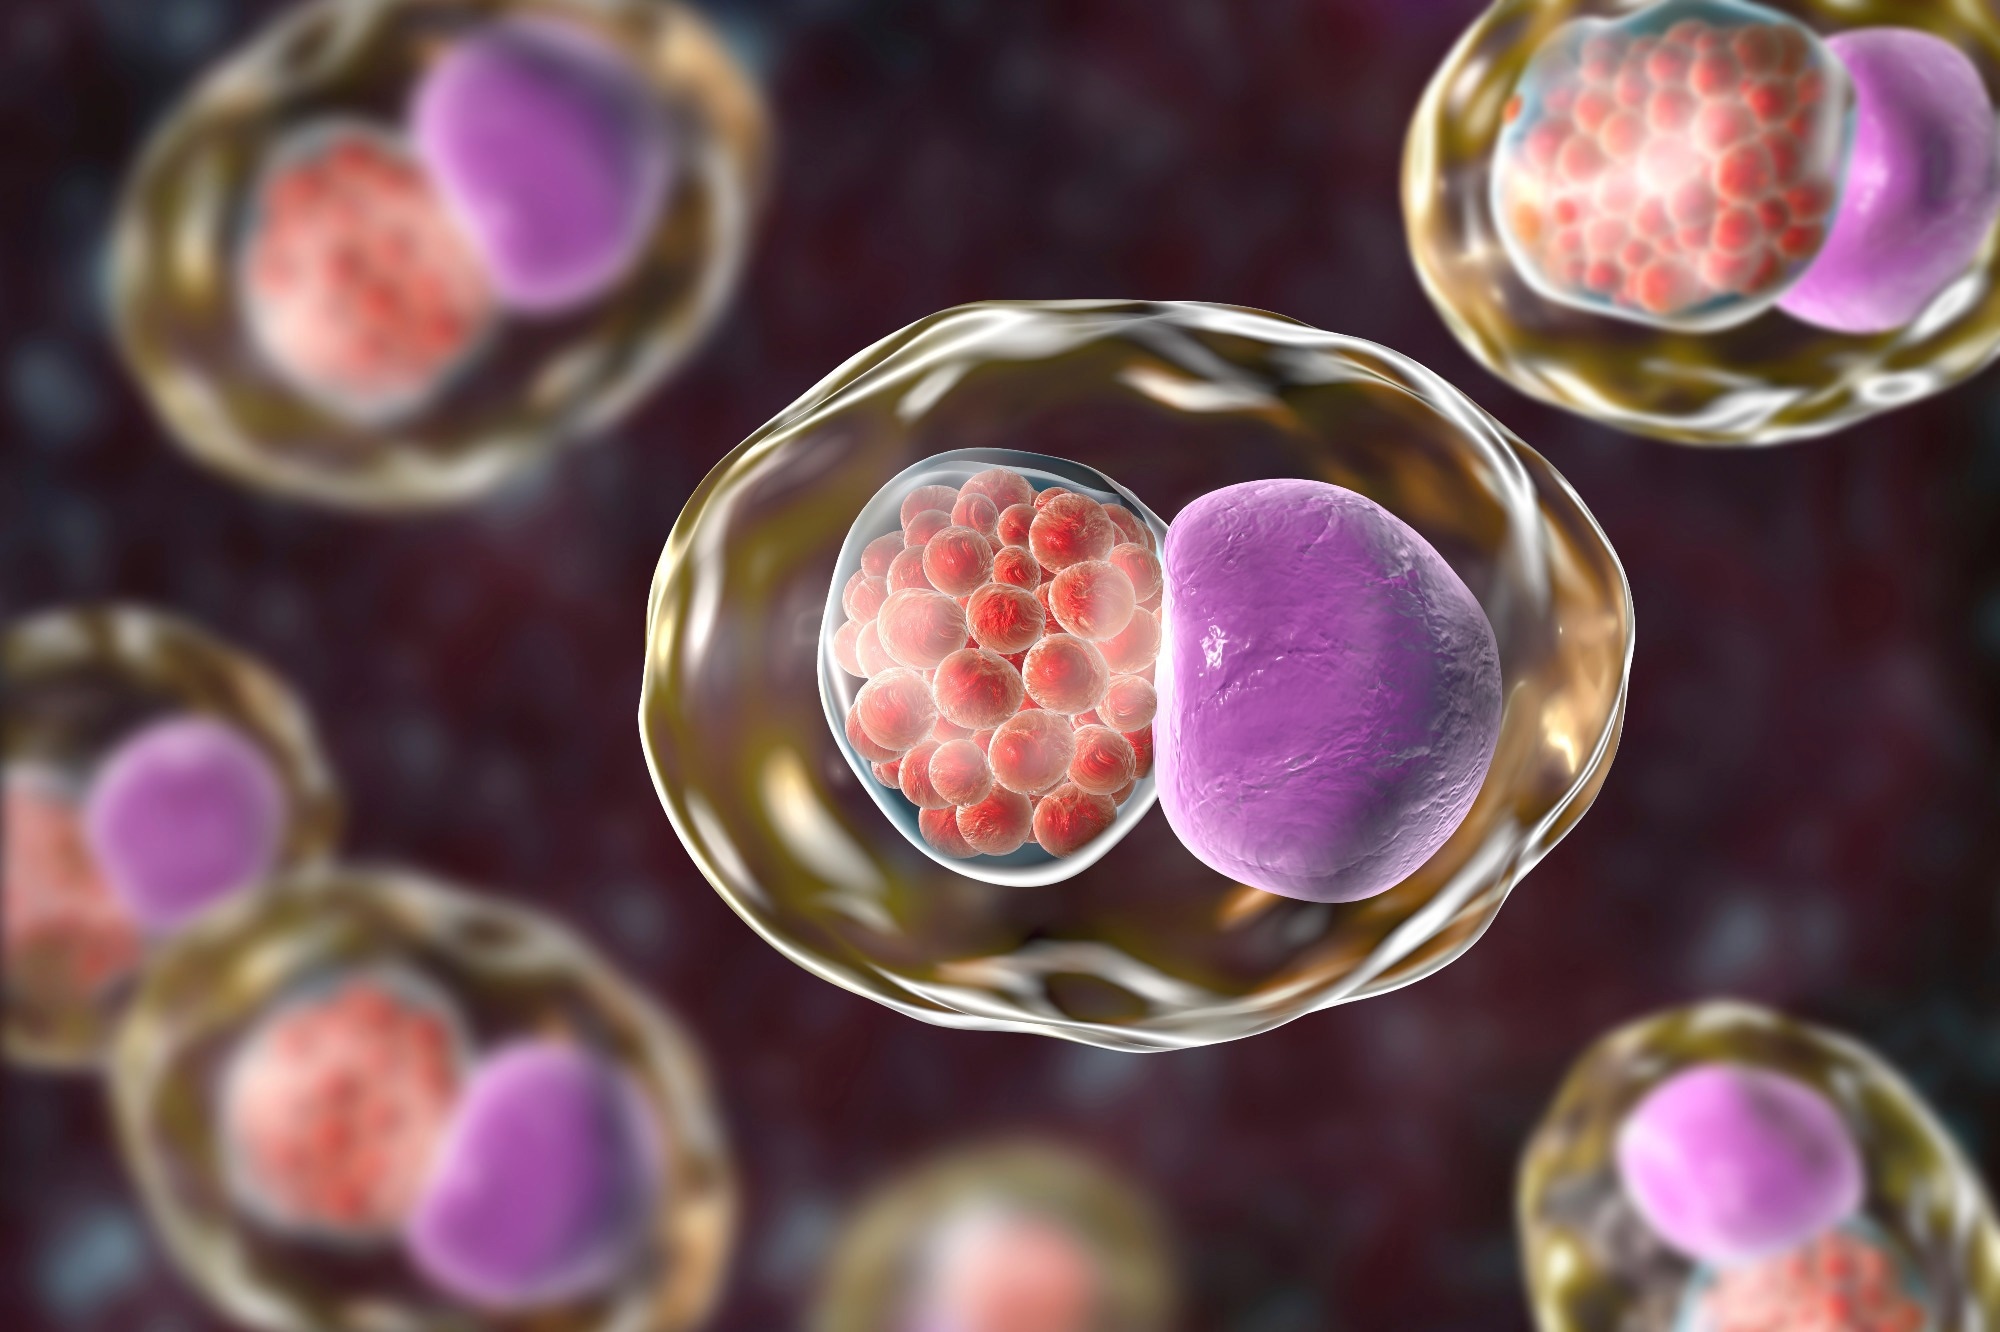 Chlamydia trachomatis bacteria, 3D illustration showing reticulate bodies of Chlamydia forming intracellular intracytoplasmic inclusions (small red) near the cell nucleus (purple). Image Credit: Kateryna Kon / Shutterstock